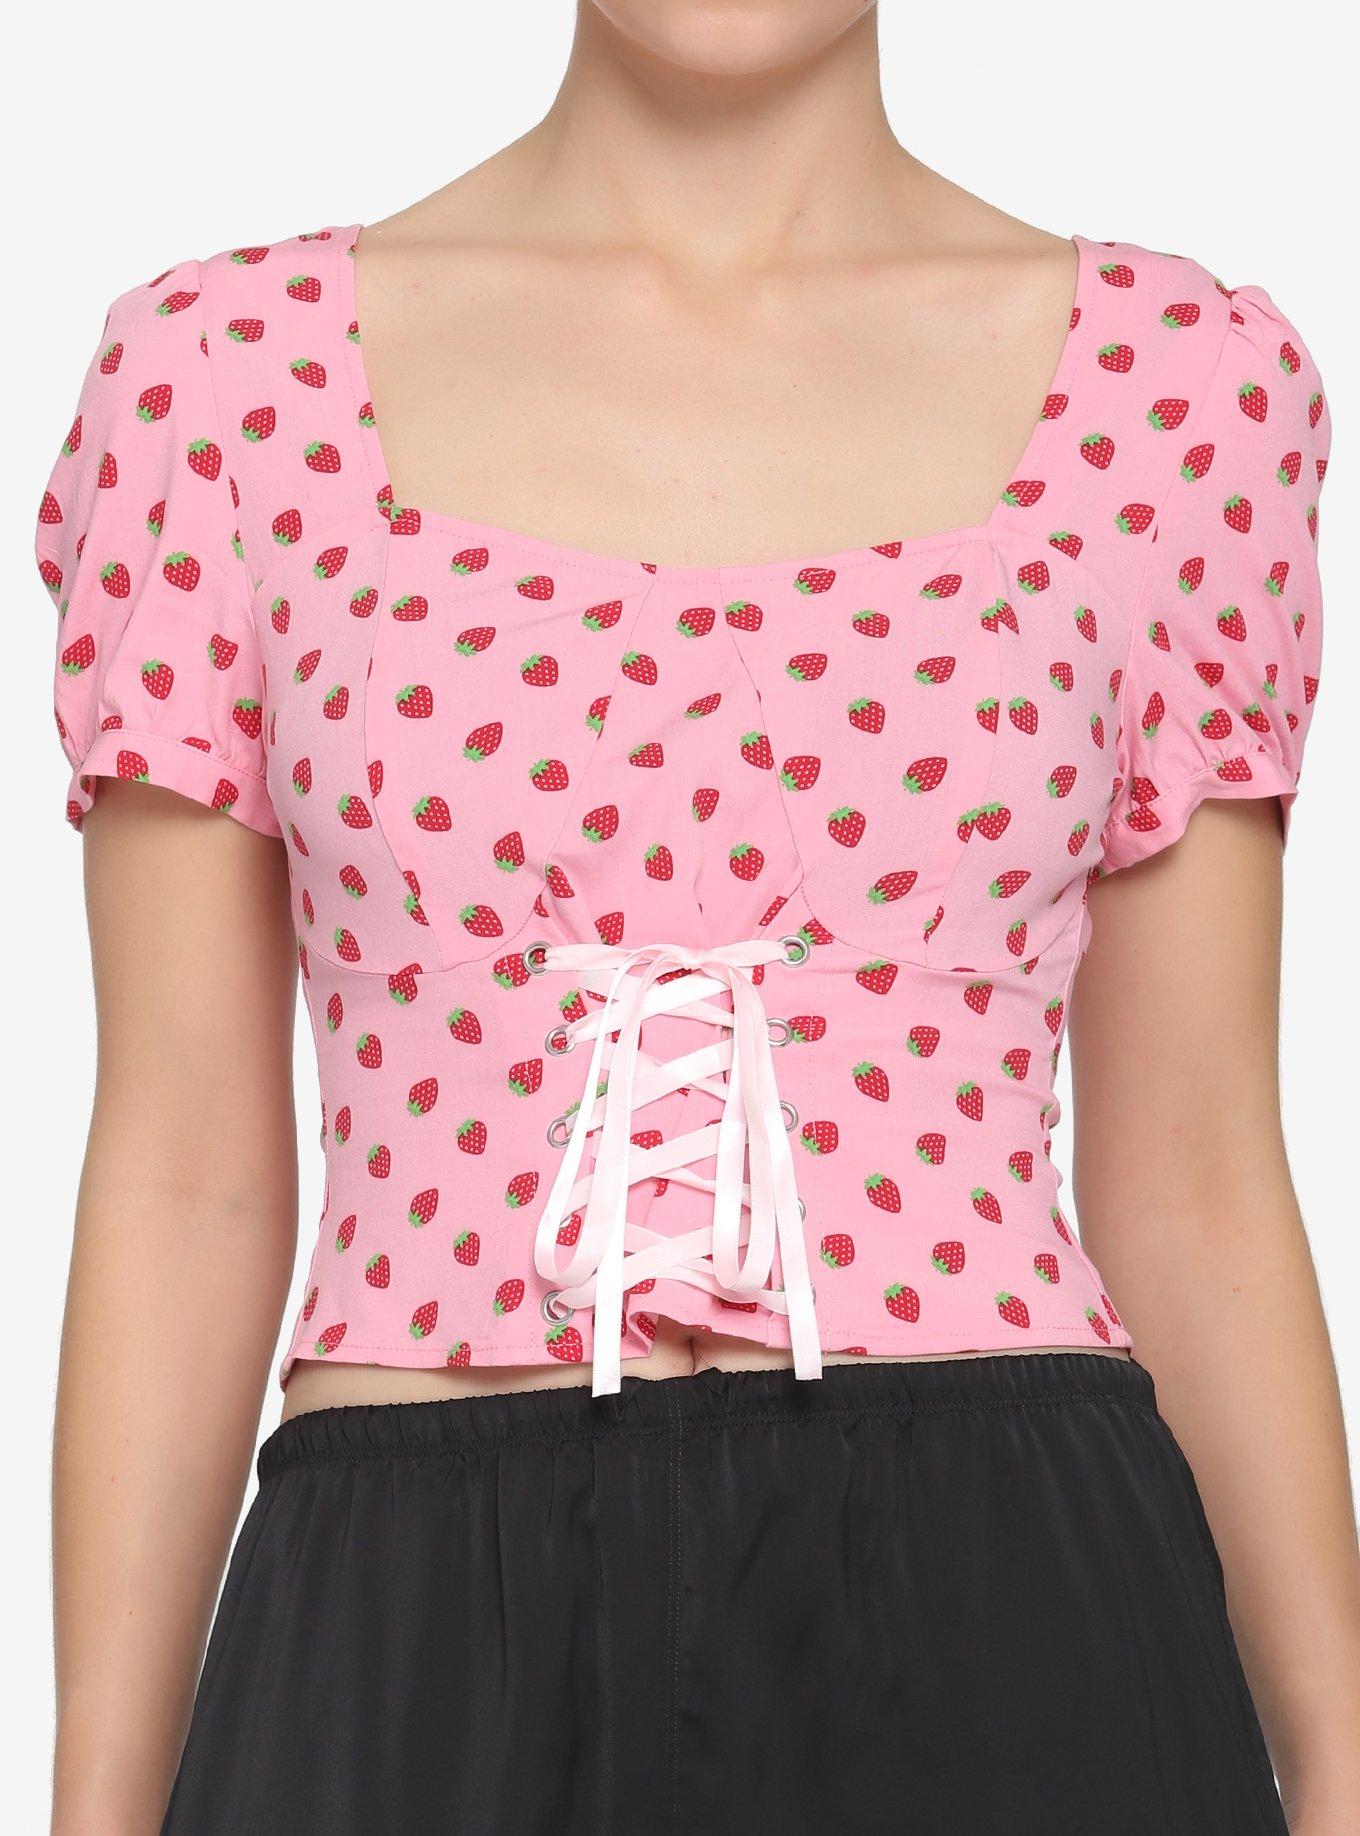 Strawberry Lace-Up Girls Crop Woven Top, PINK, hi-res